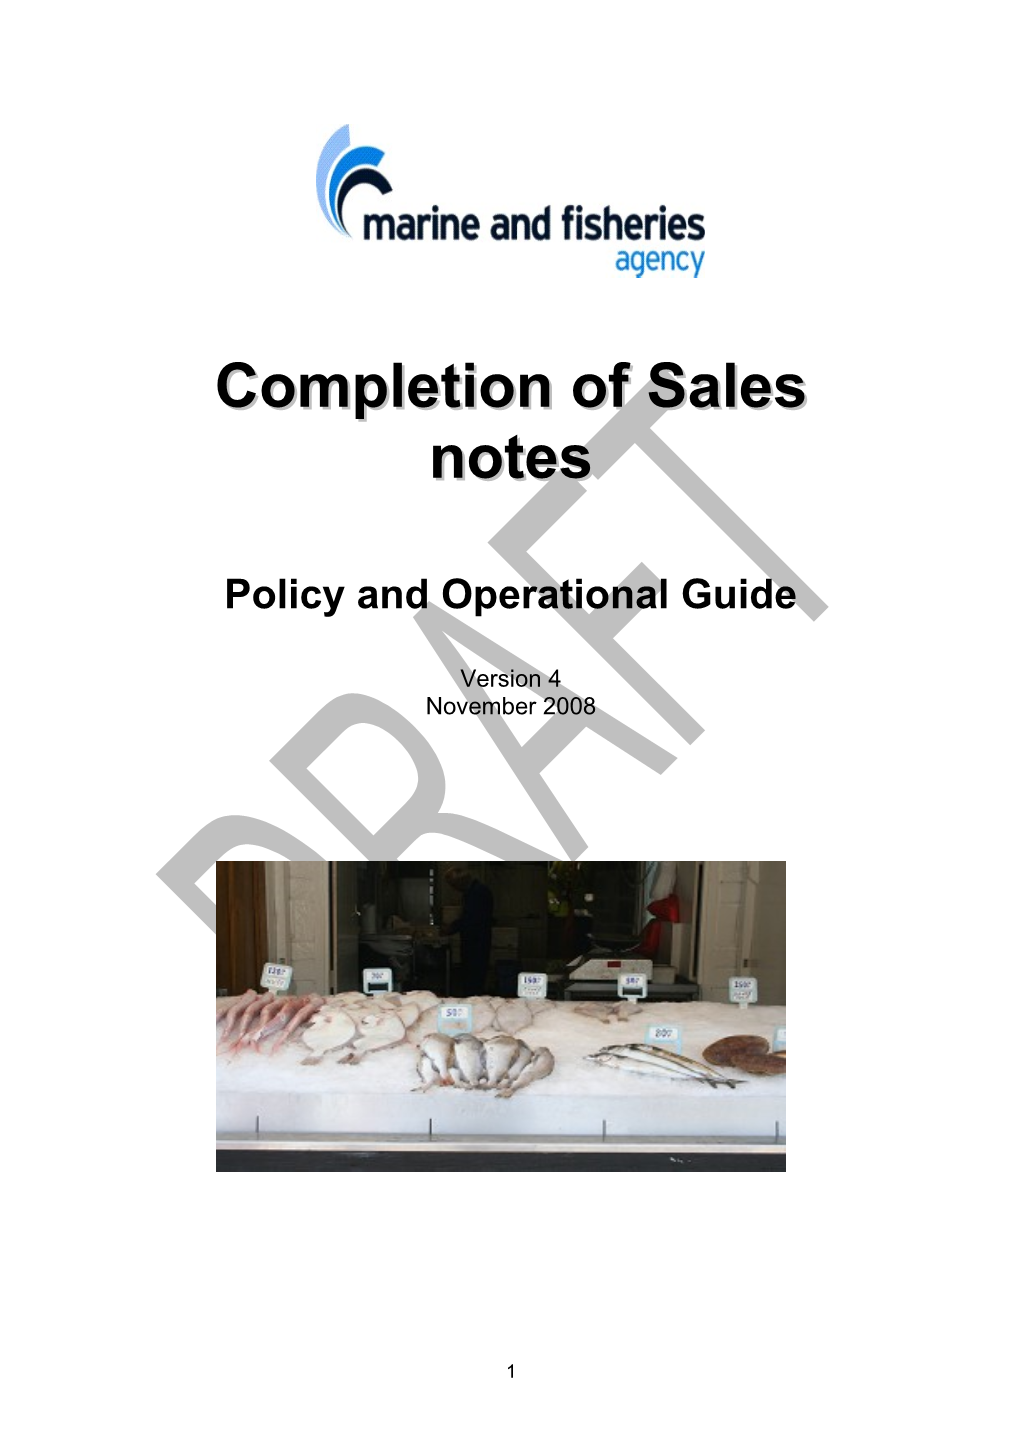 Policy and Operational Guide